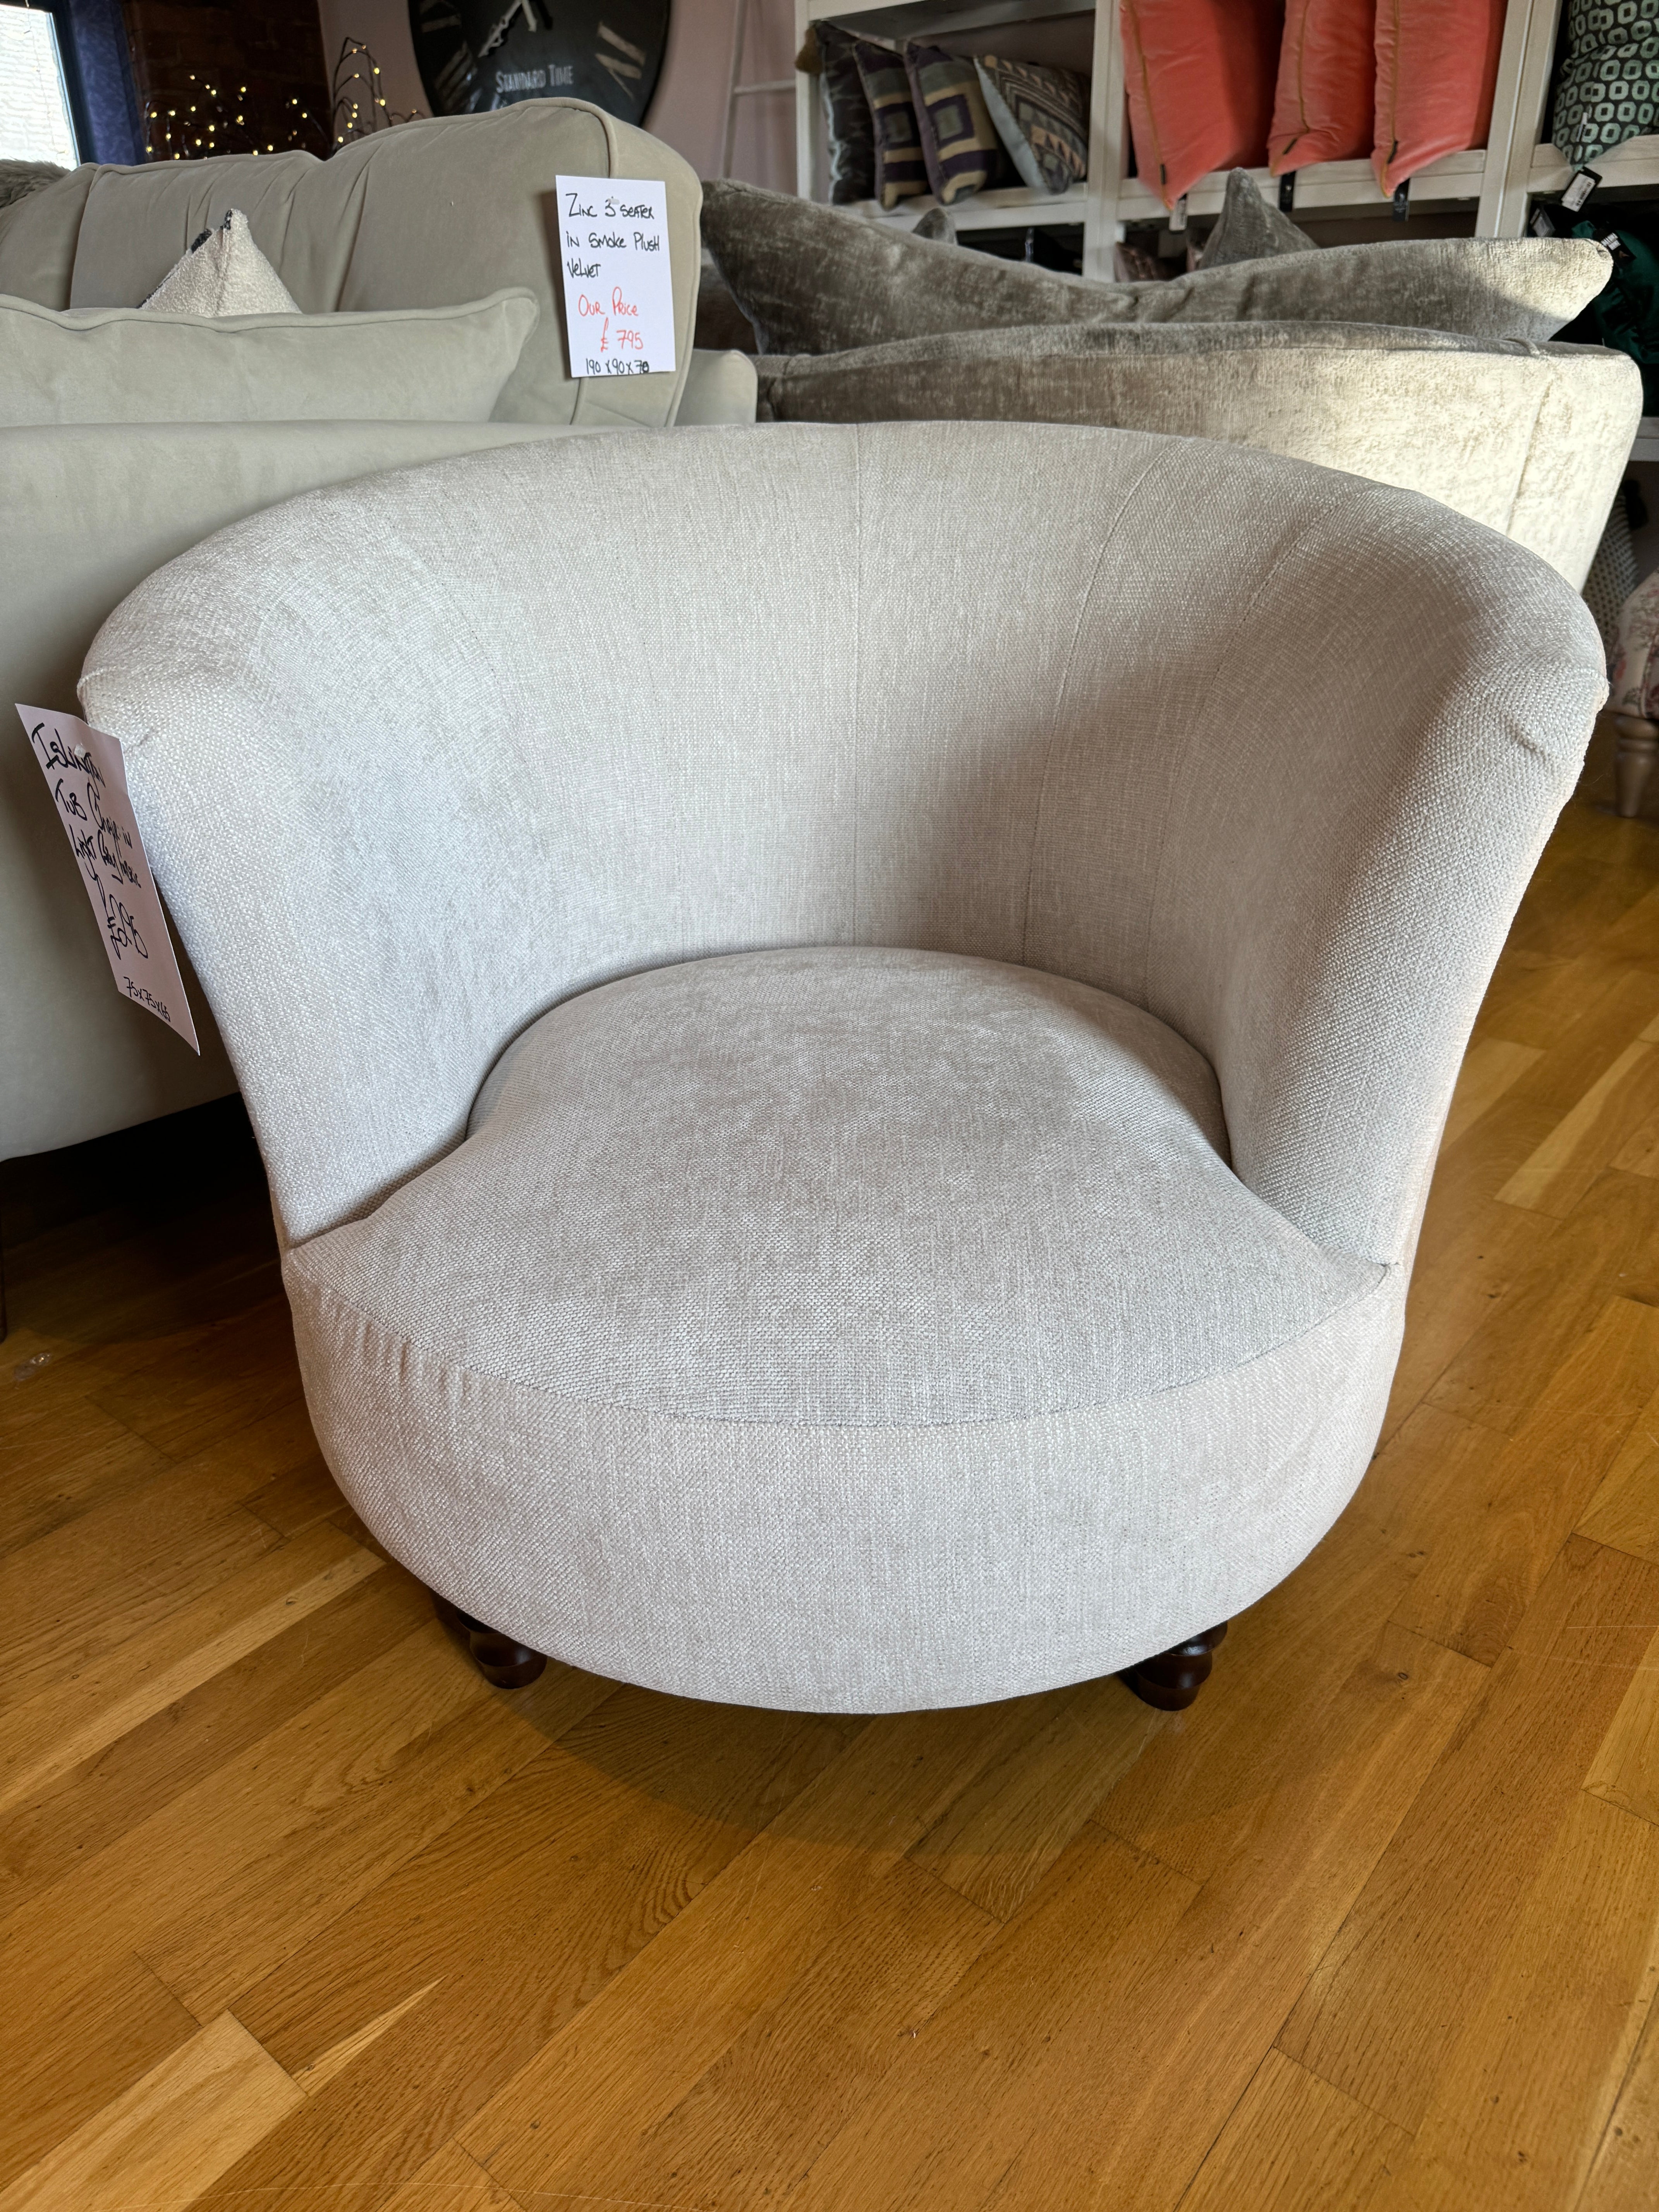 SOFOLOGY ISLINGTON small accent chair in ivory / light grey fabric